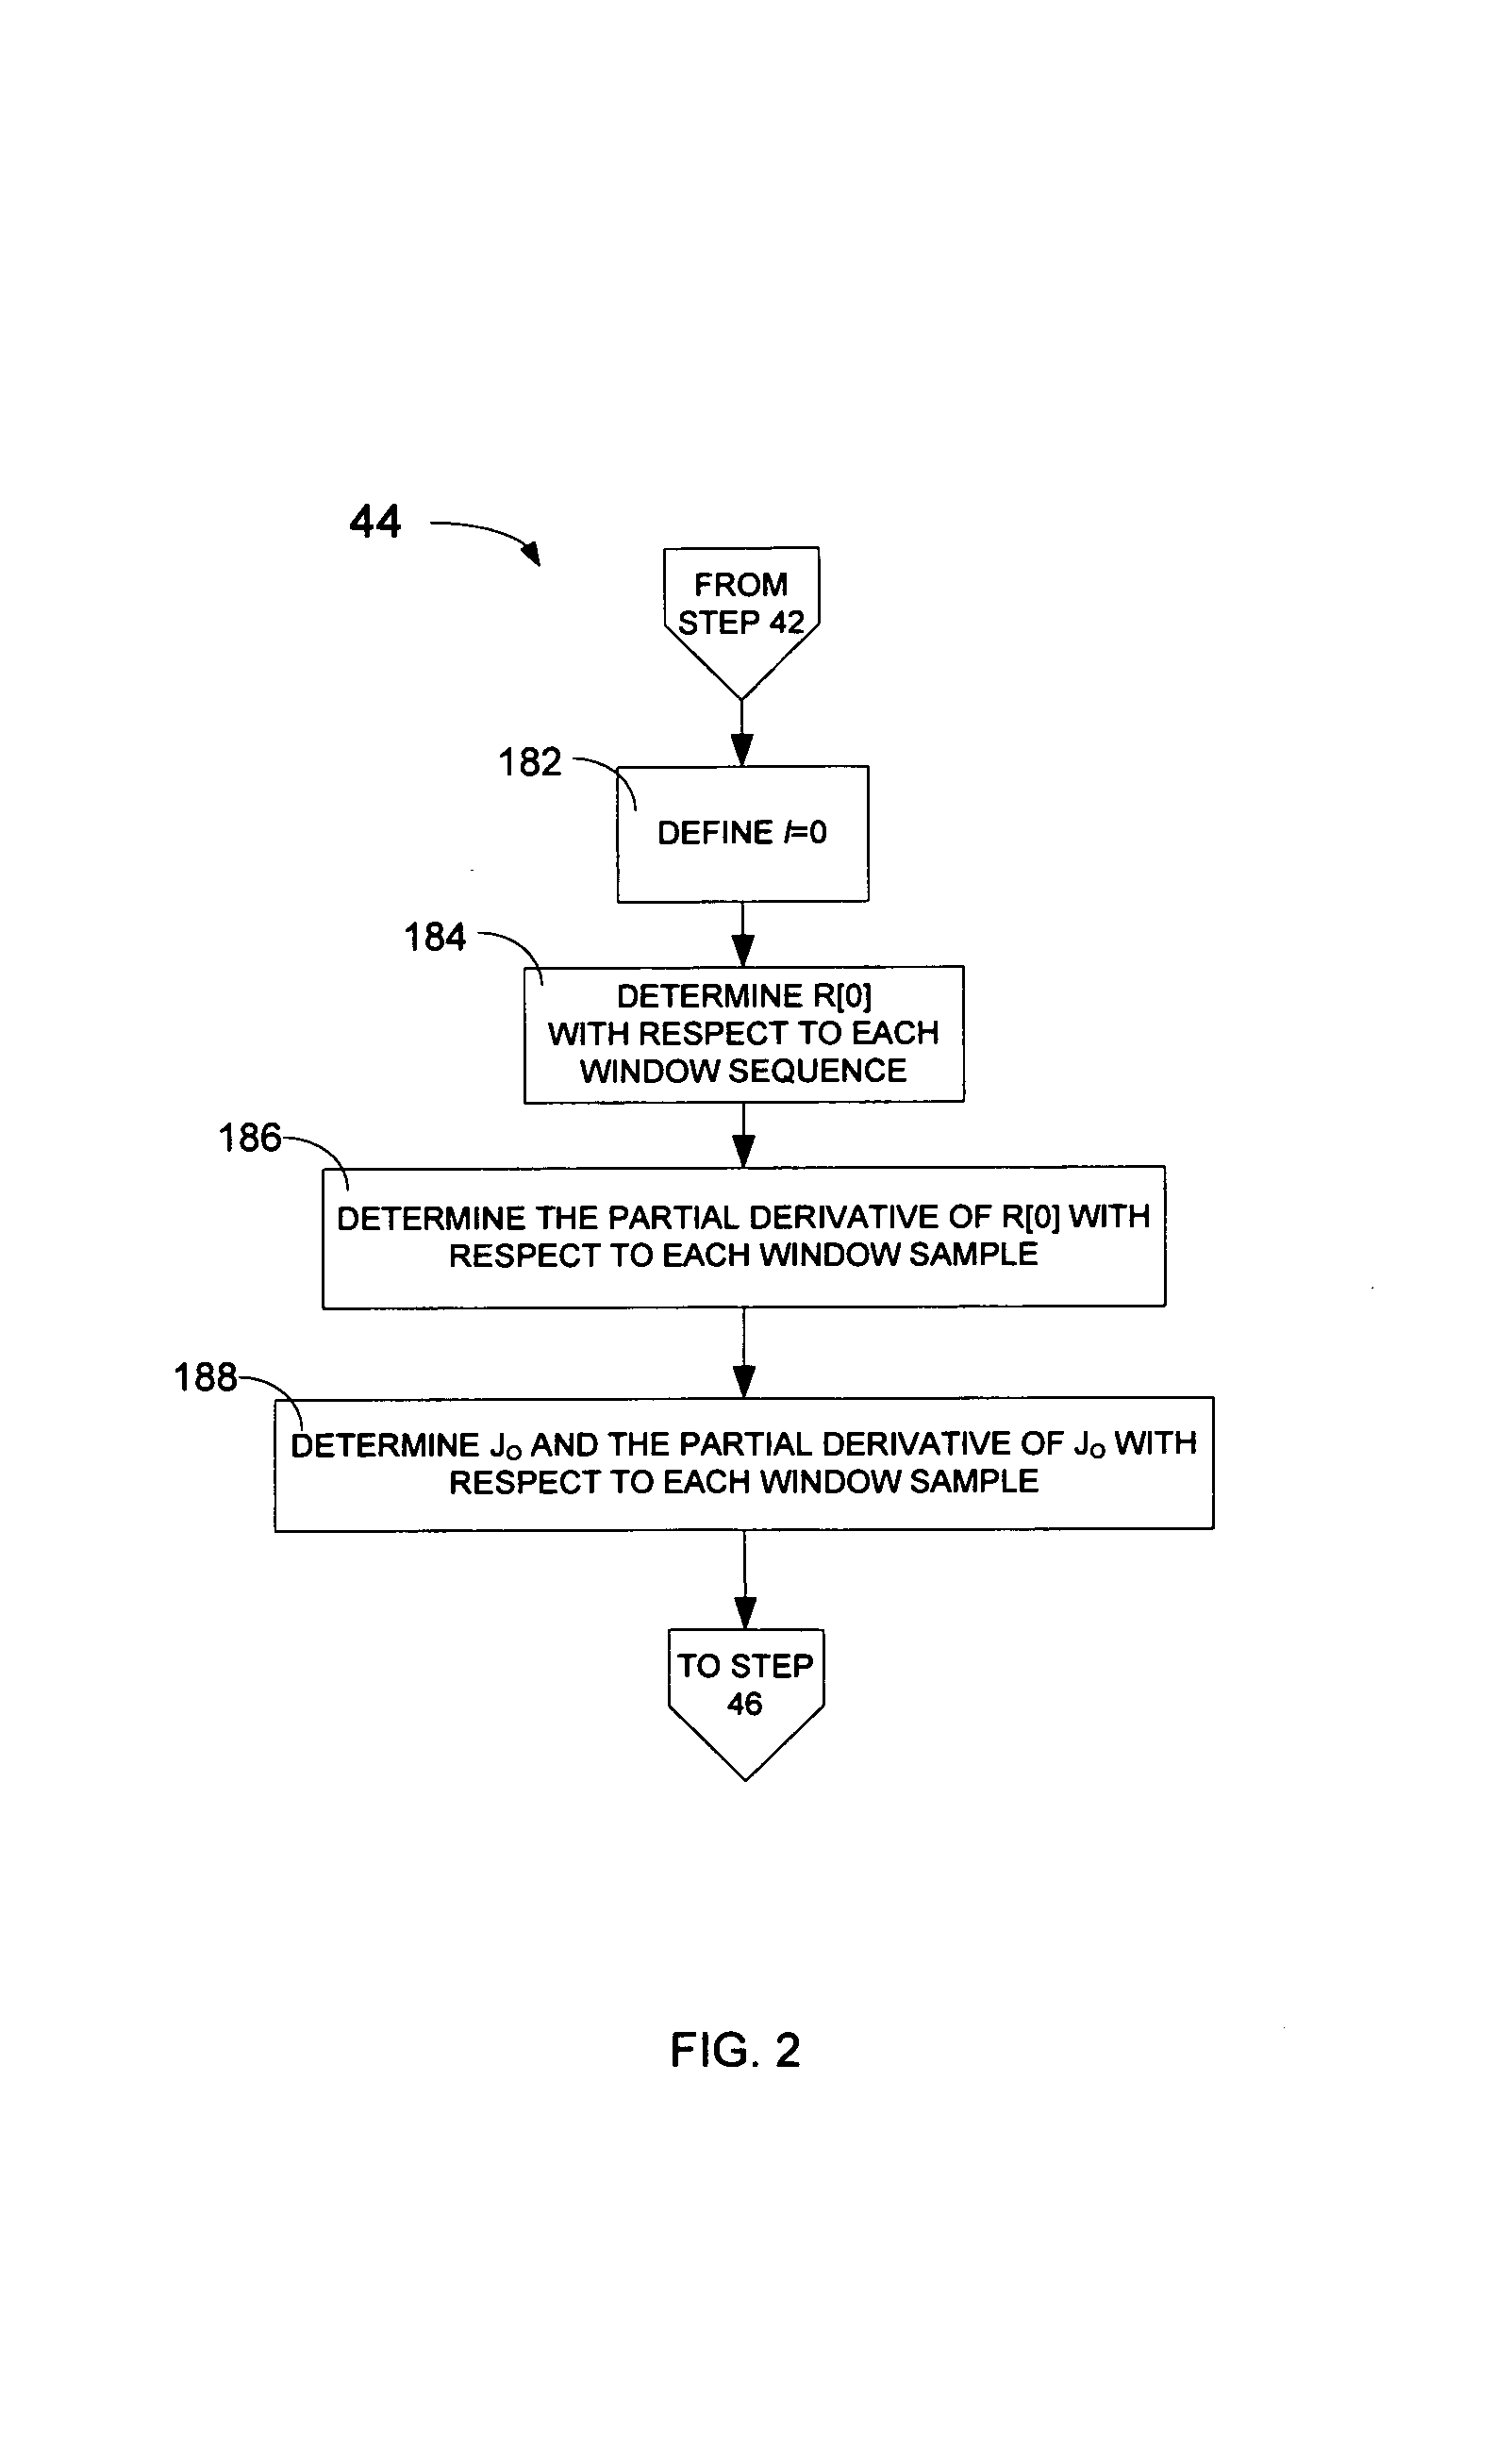 Method and apparatus for gradient-descent based window optimization for linear prediction analysis